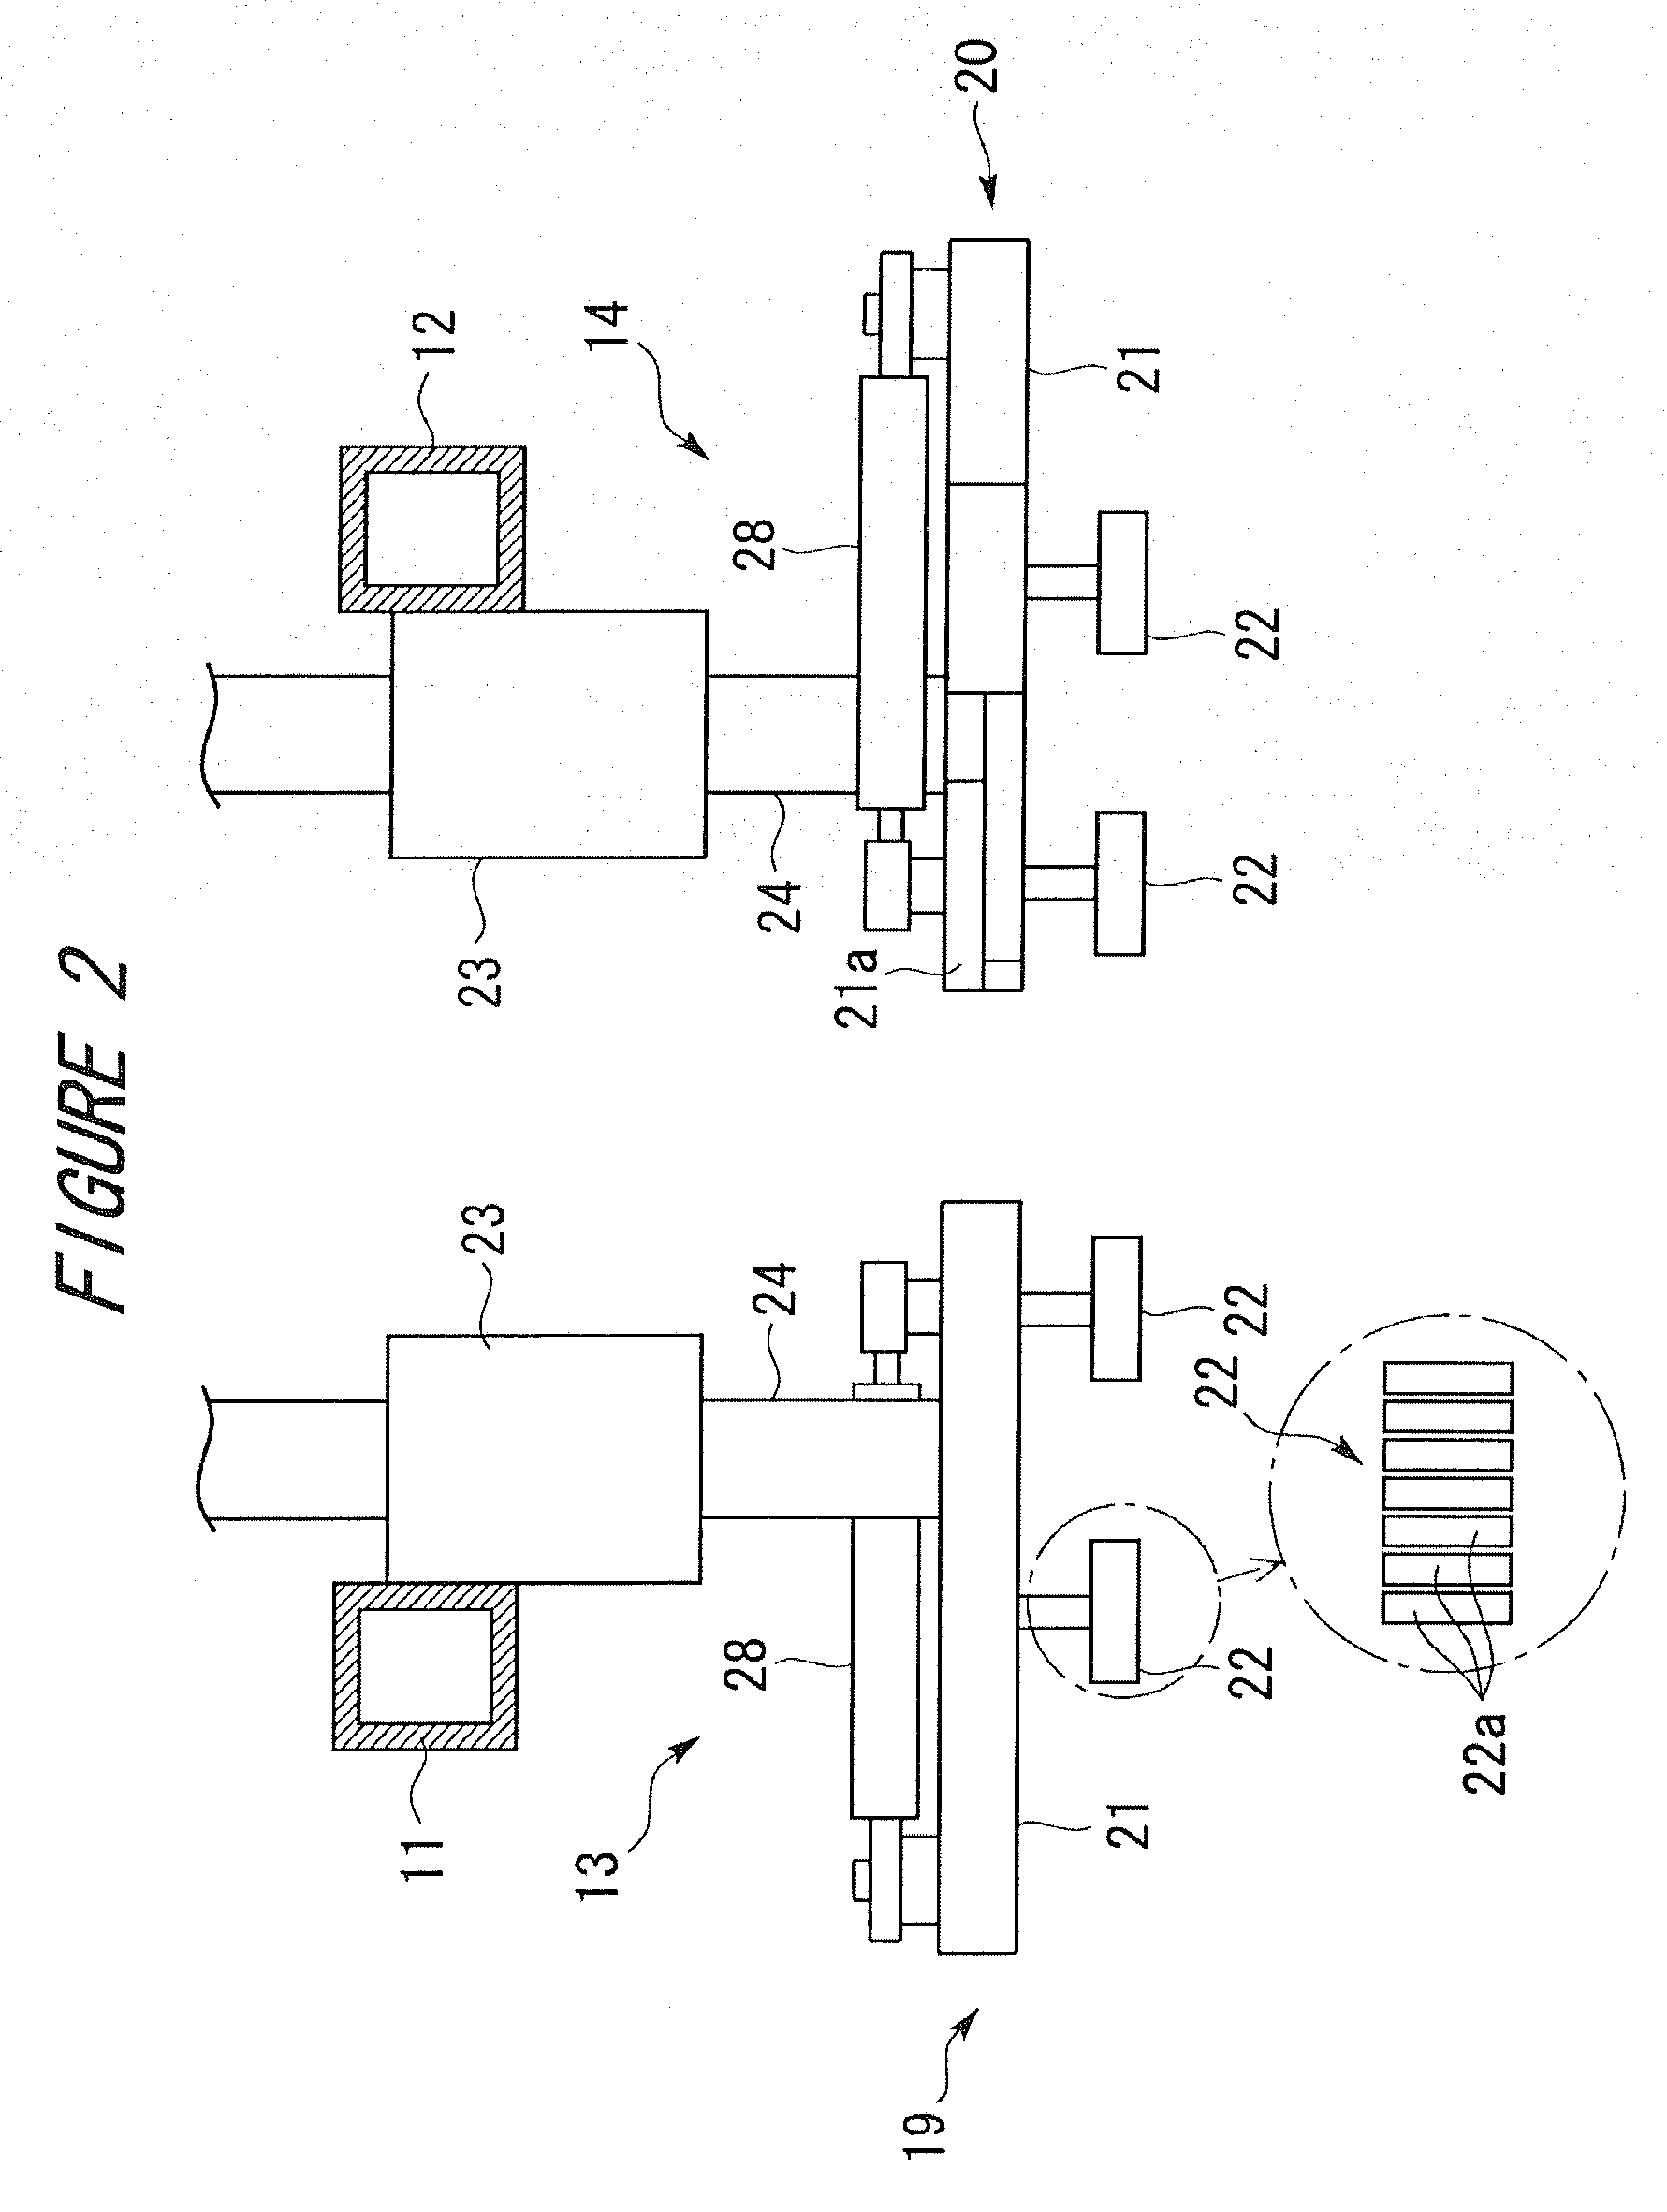 Work sheet conveying device